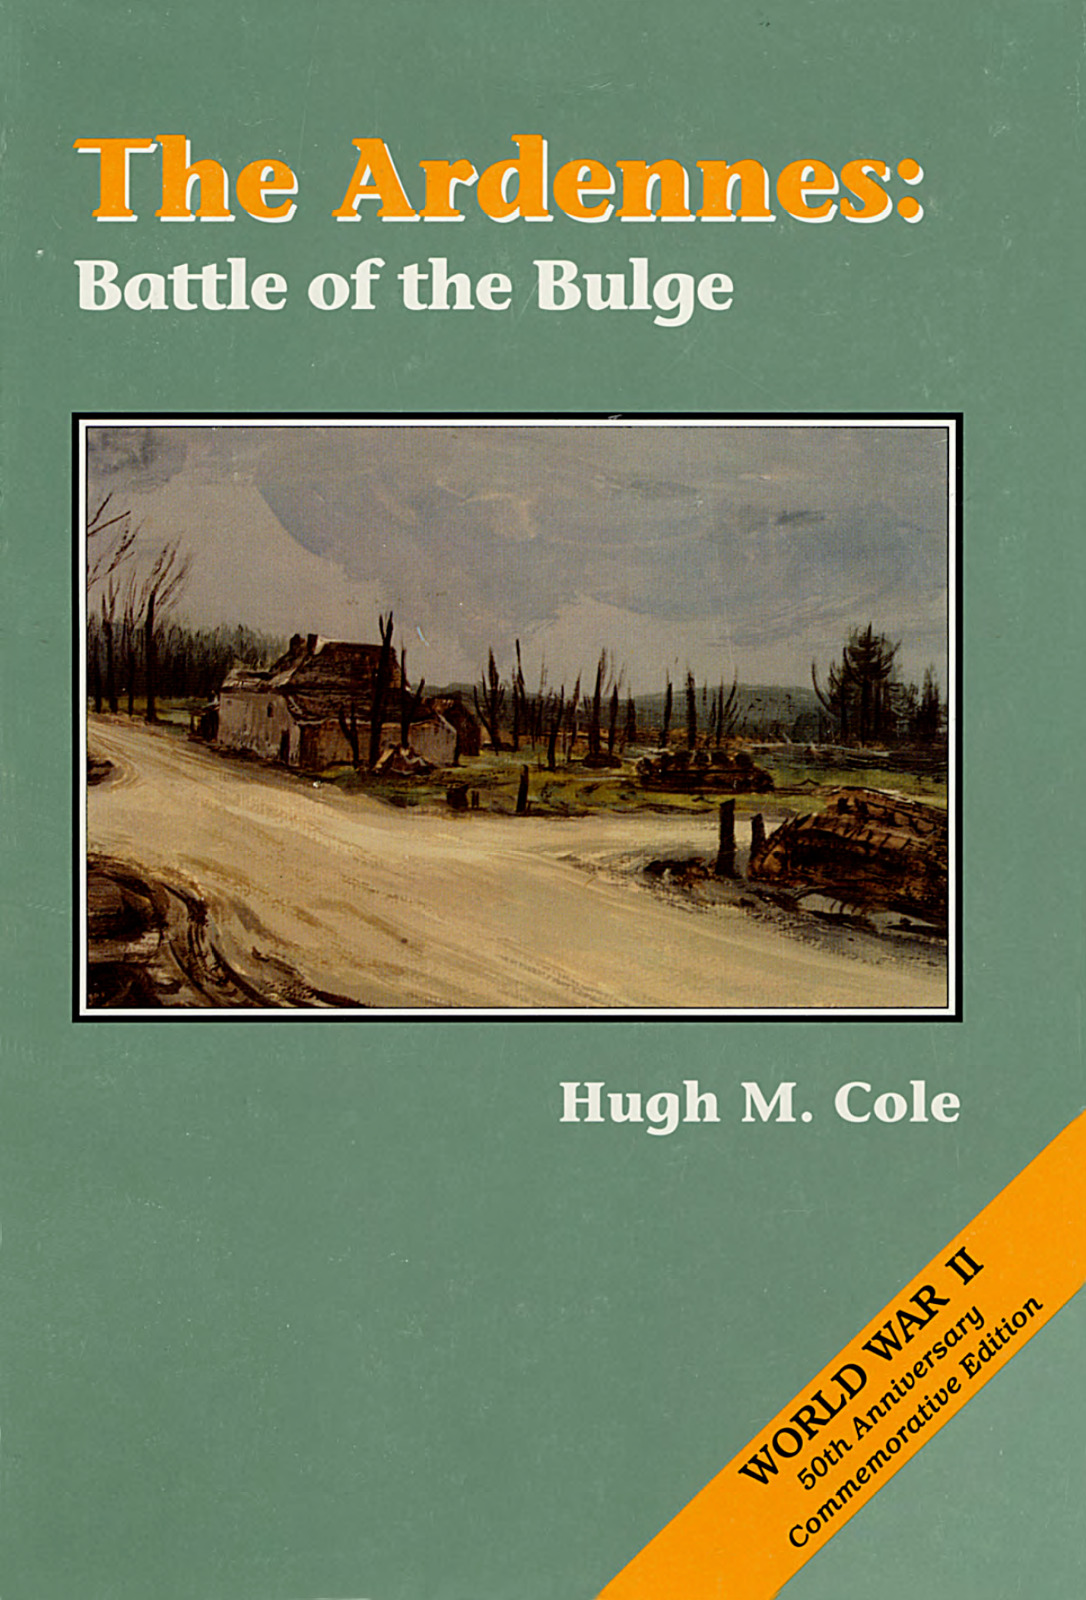 759 Page 1993 Ardennes Battle of Bulge 7th 9th Armored Division Book on Data CD